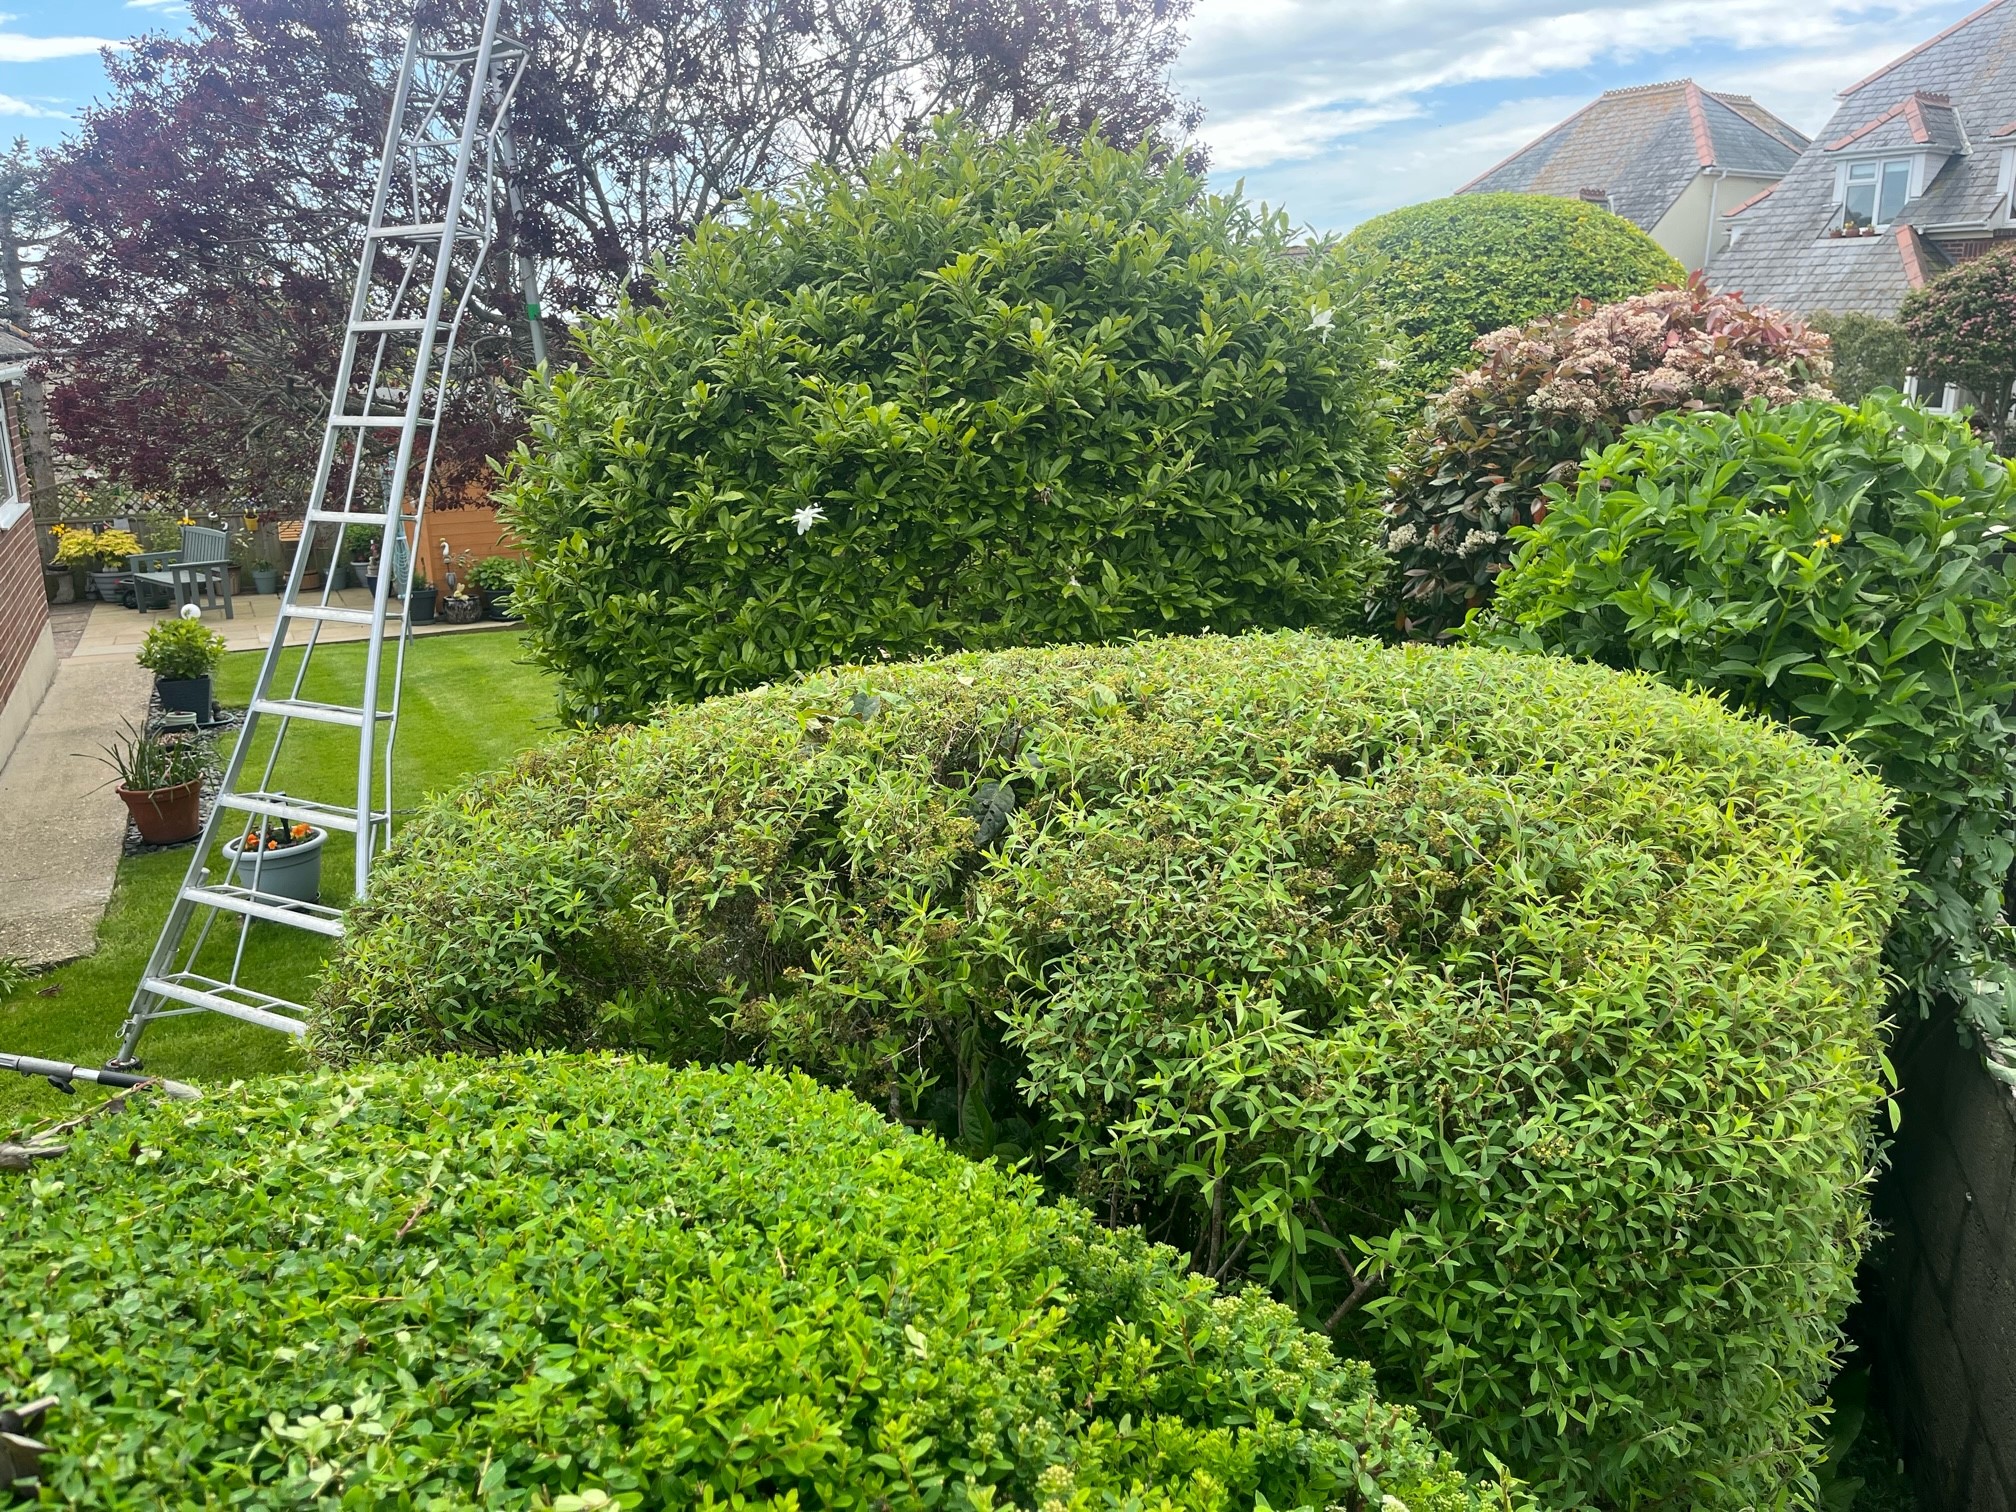 Hedge Trimming Weymouth, hedge trimming, Removal, Cutting, Reduction in Weymouth, Dorchester, Portland, Dorset - garden photo of trimmed hedges and shrubs with a tripod ladder